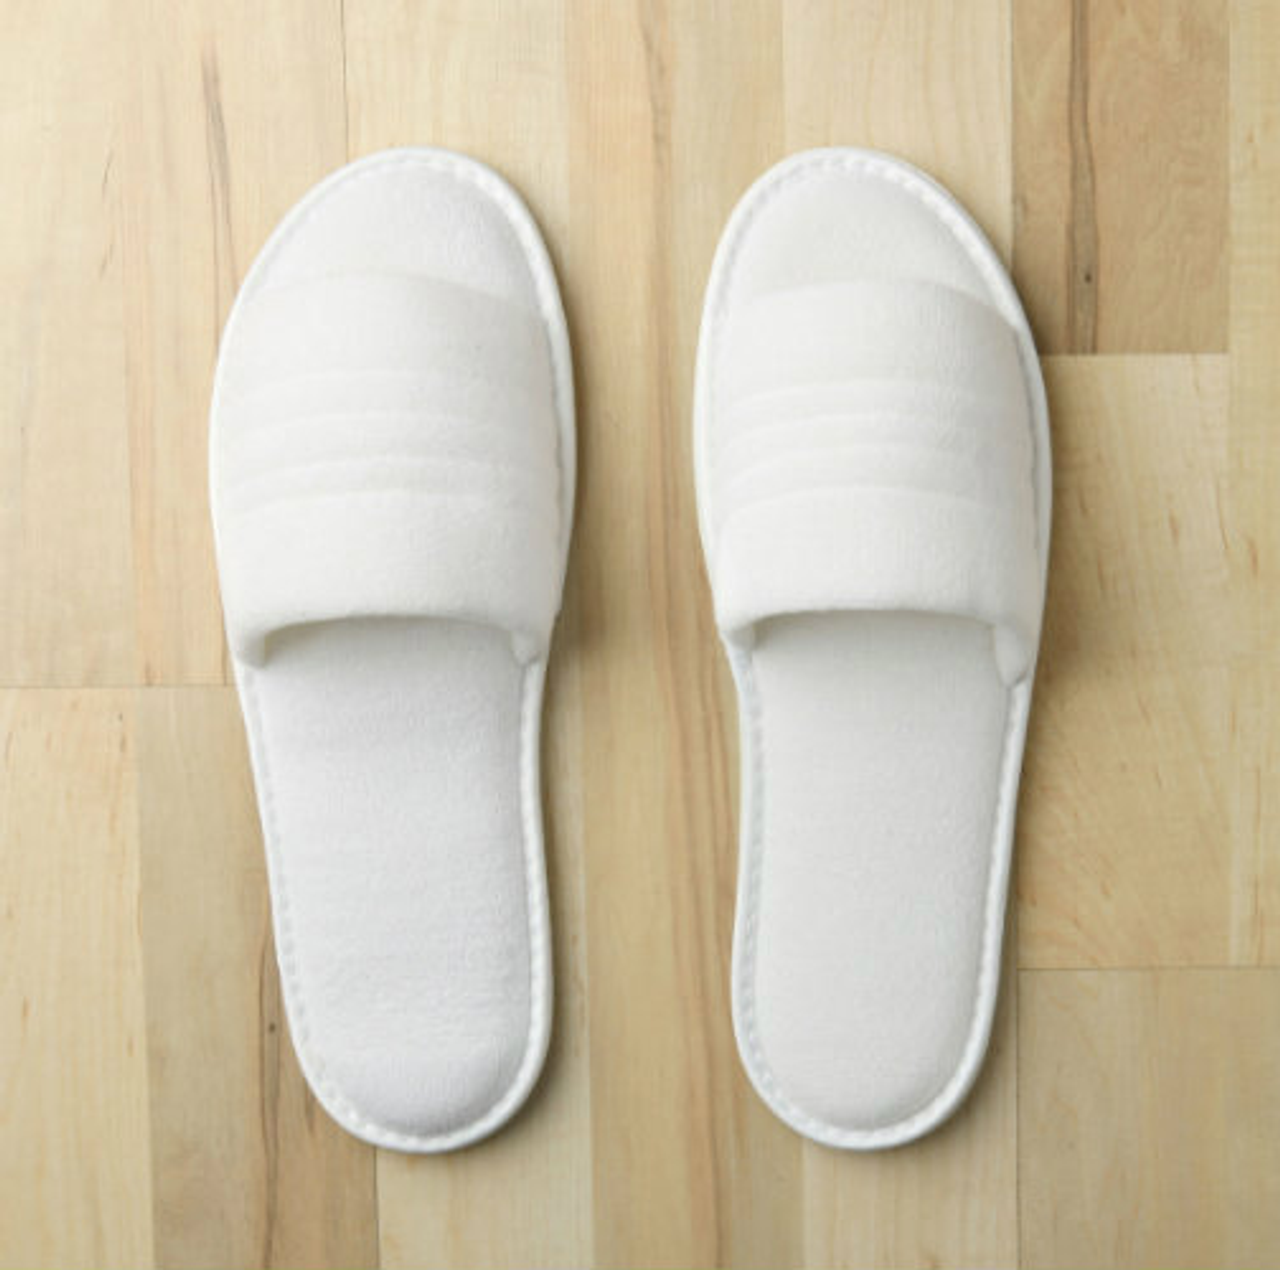 terry slippers